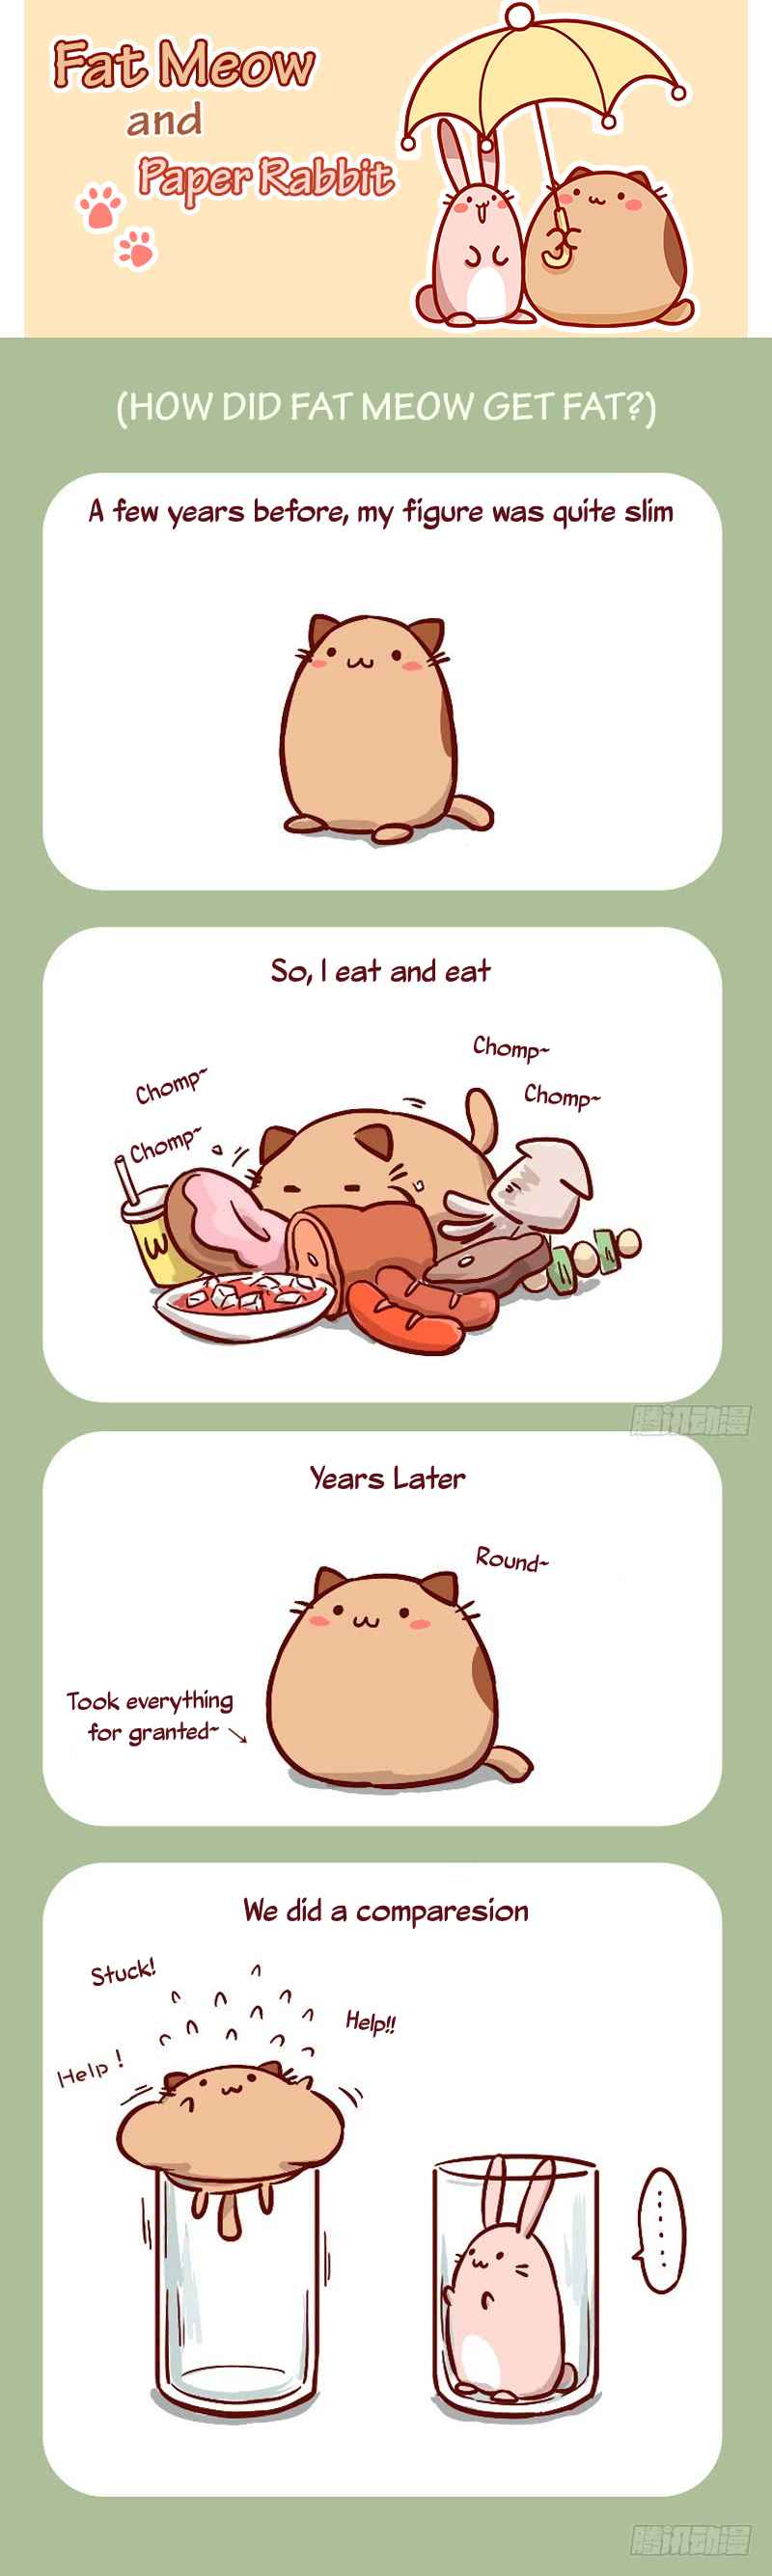 Fat Meow and Paper Rabbit Ch. 2 There is a cat who is fat!